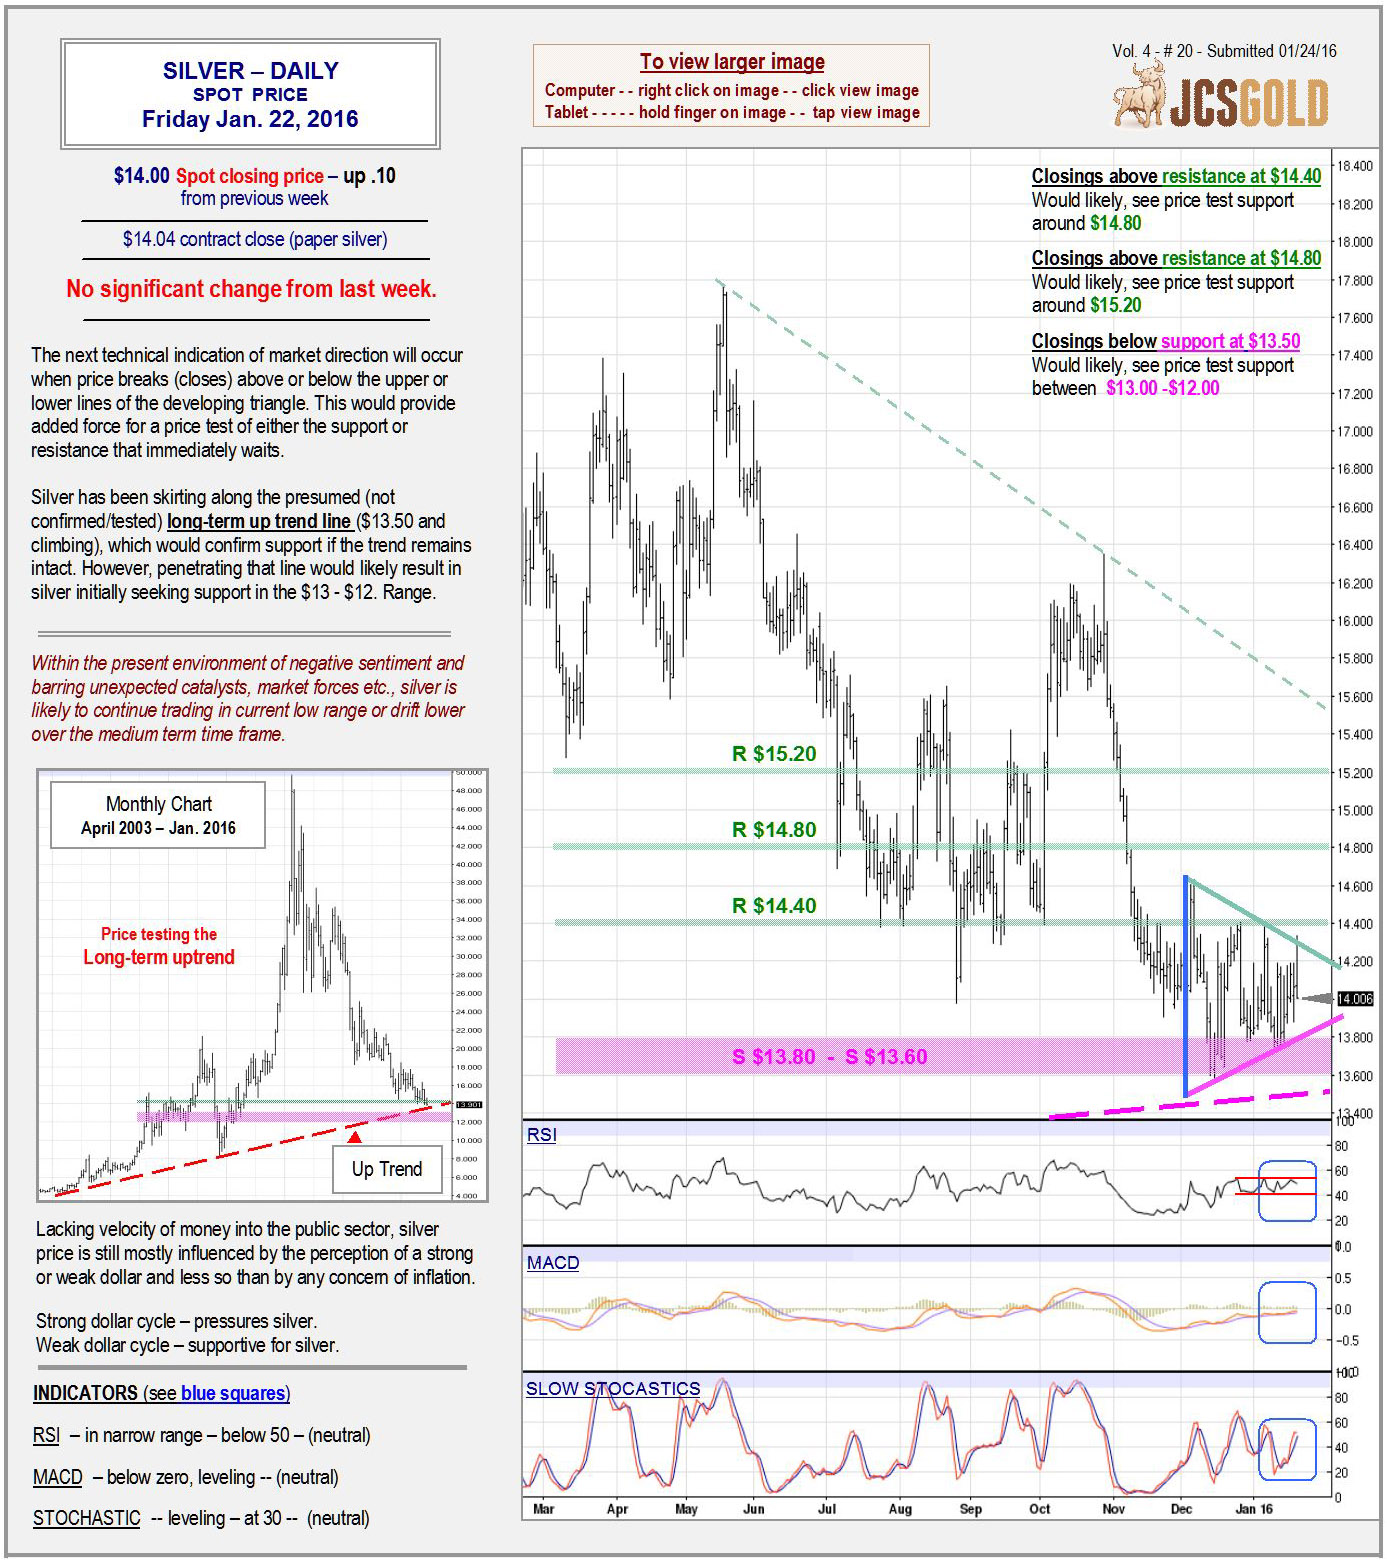 Jan 22, 2016 chart & commentary